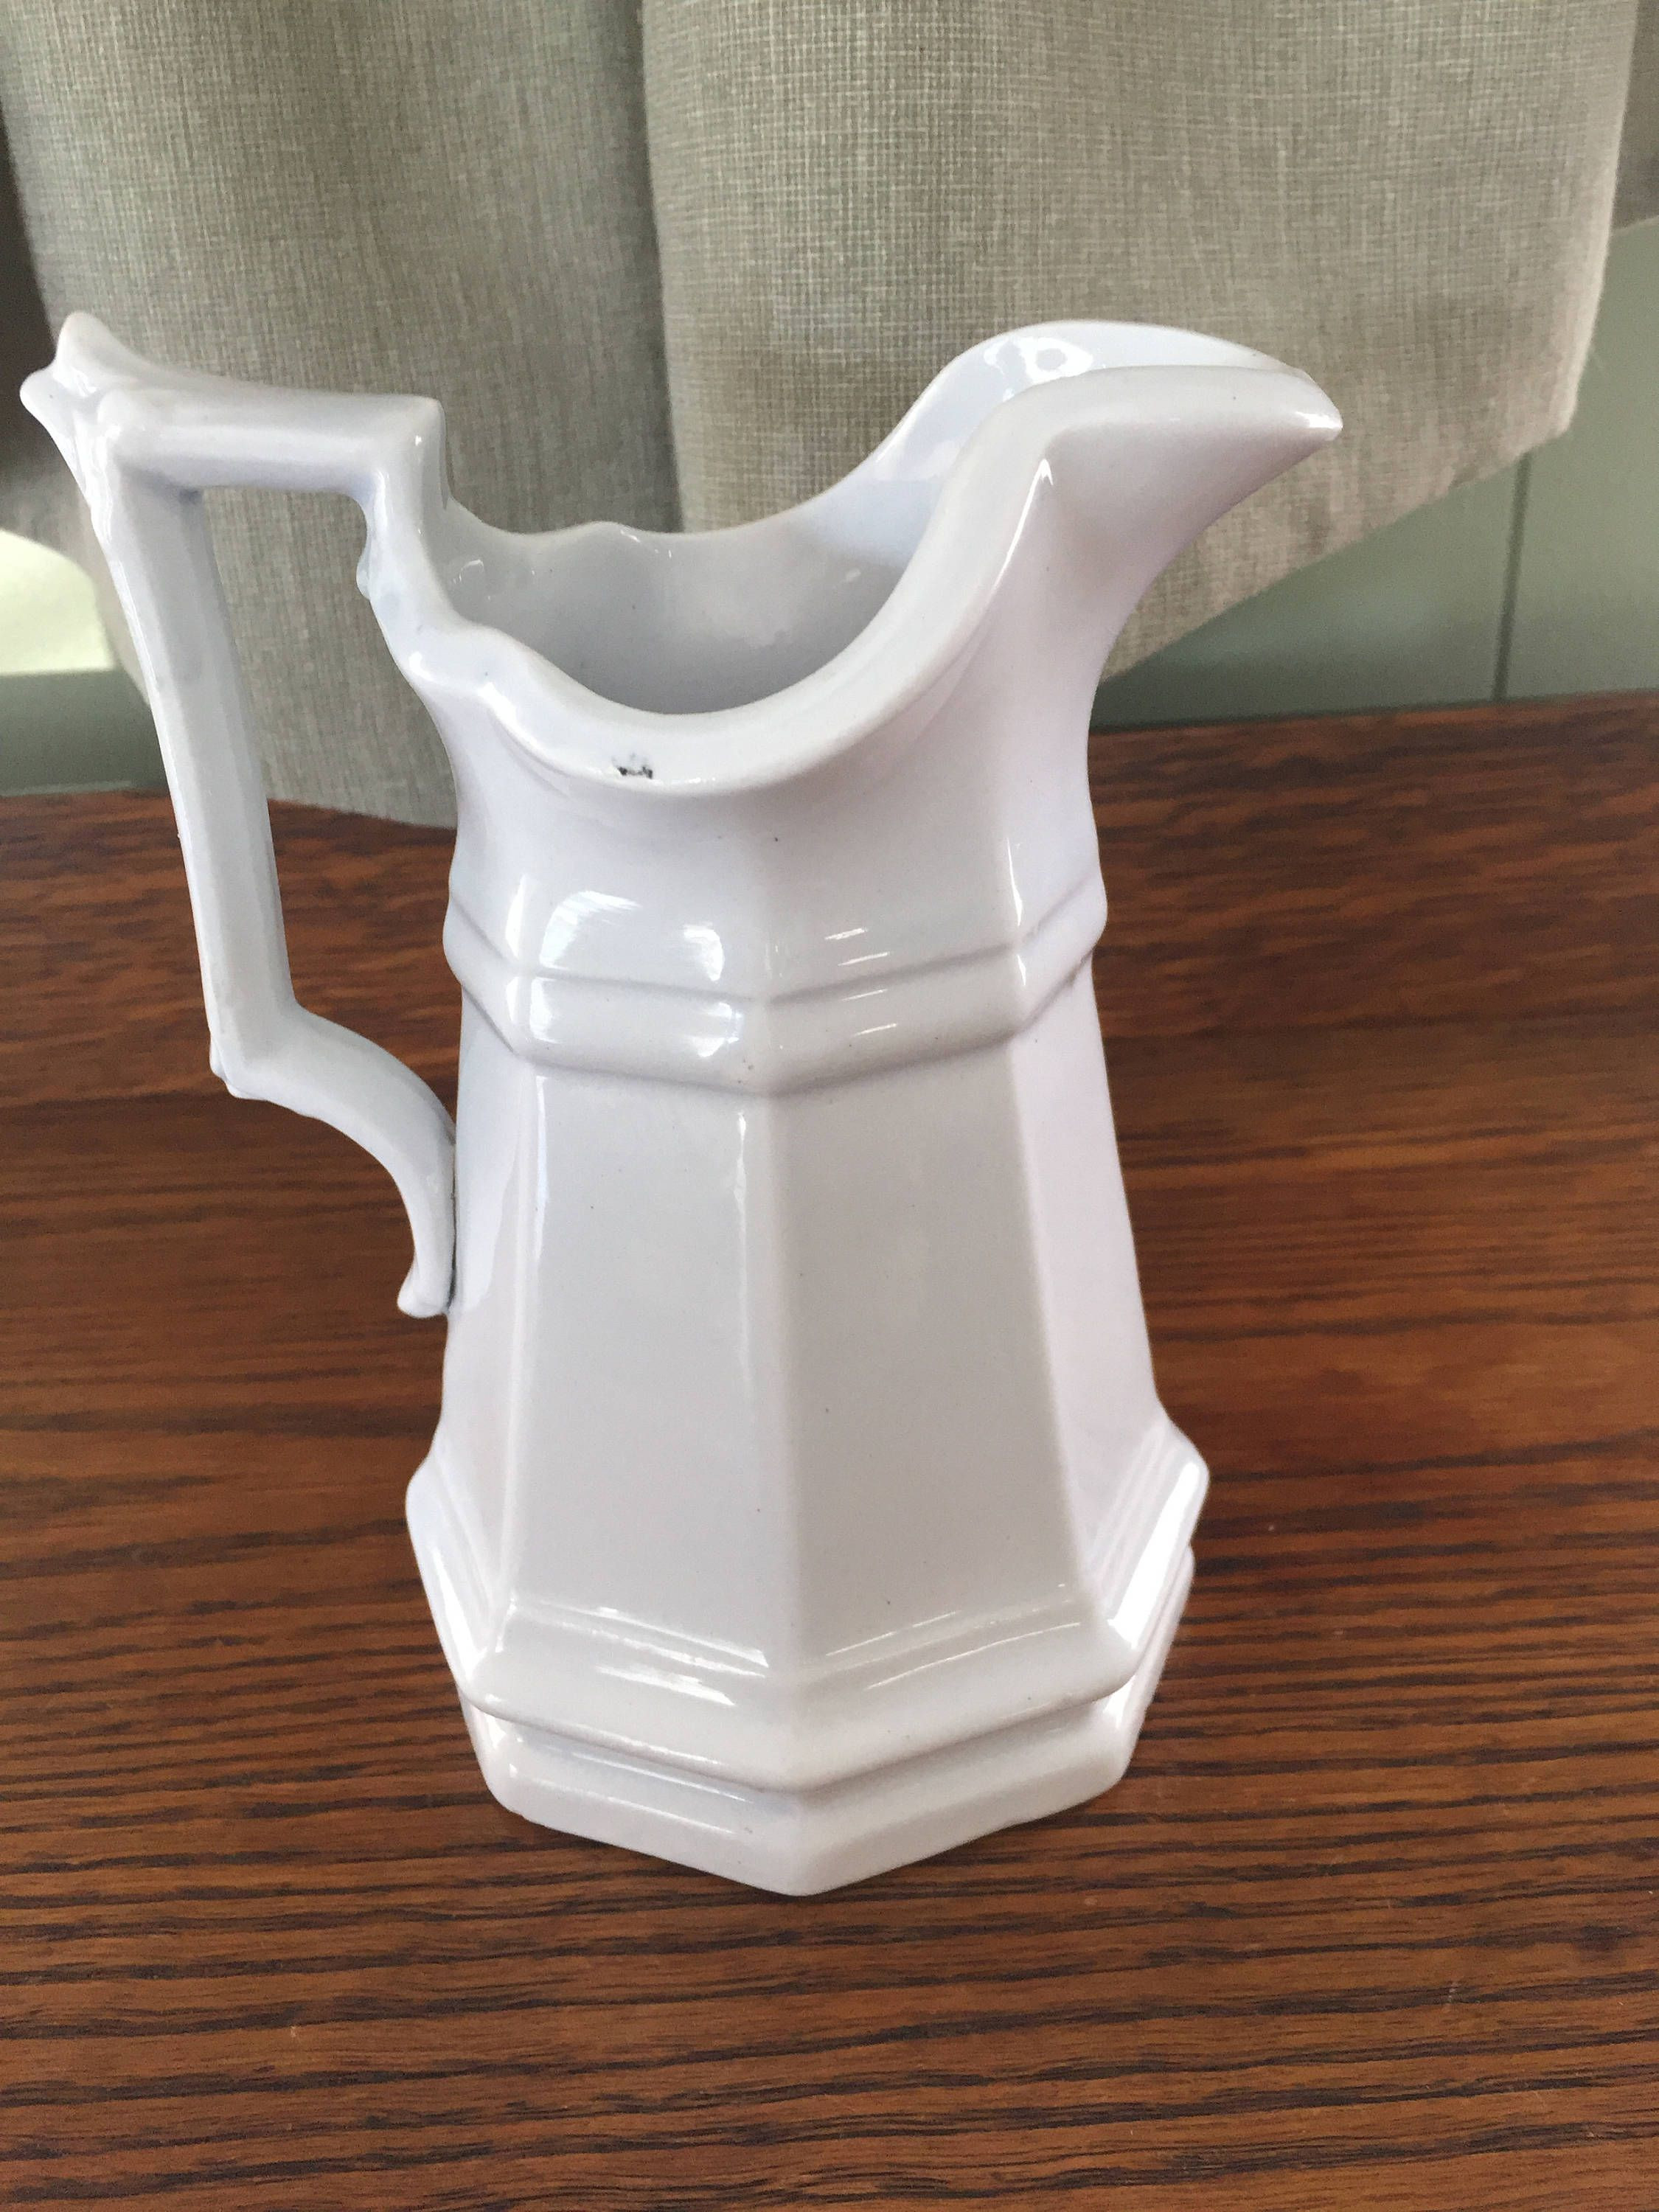 10 Nice White Pitcher Vase with Flowers 2023 free download white pitcher vase with flowers of farmhouse pitcher vase elegant farmhouse pitcher vase best all inside farmhouse pitcher vase inspirational white pearl ironstone china pitcher j wedgwood f